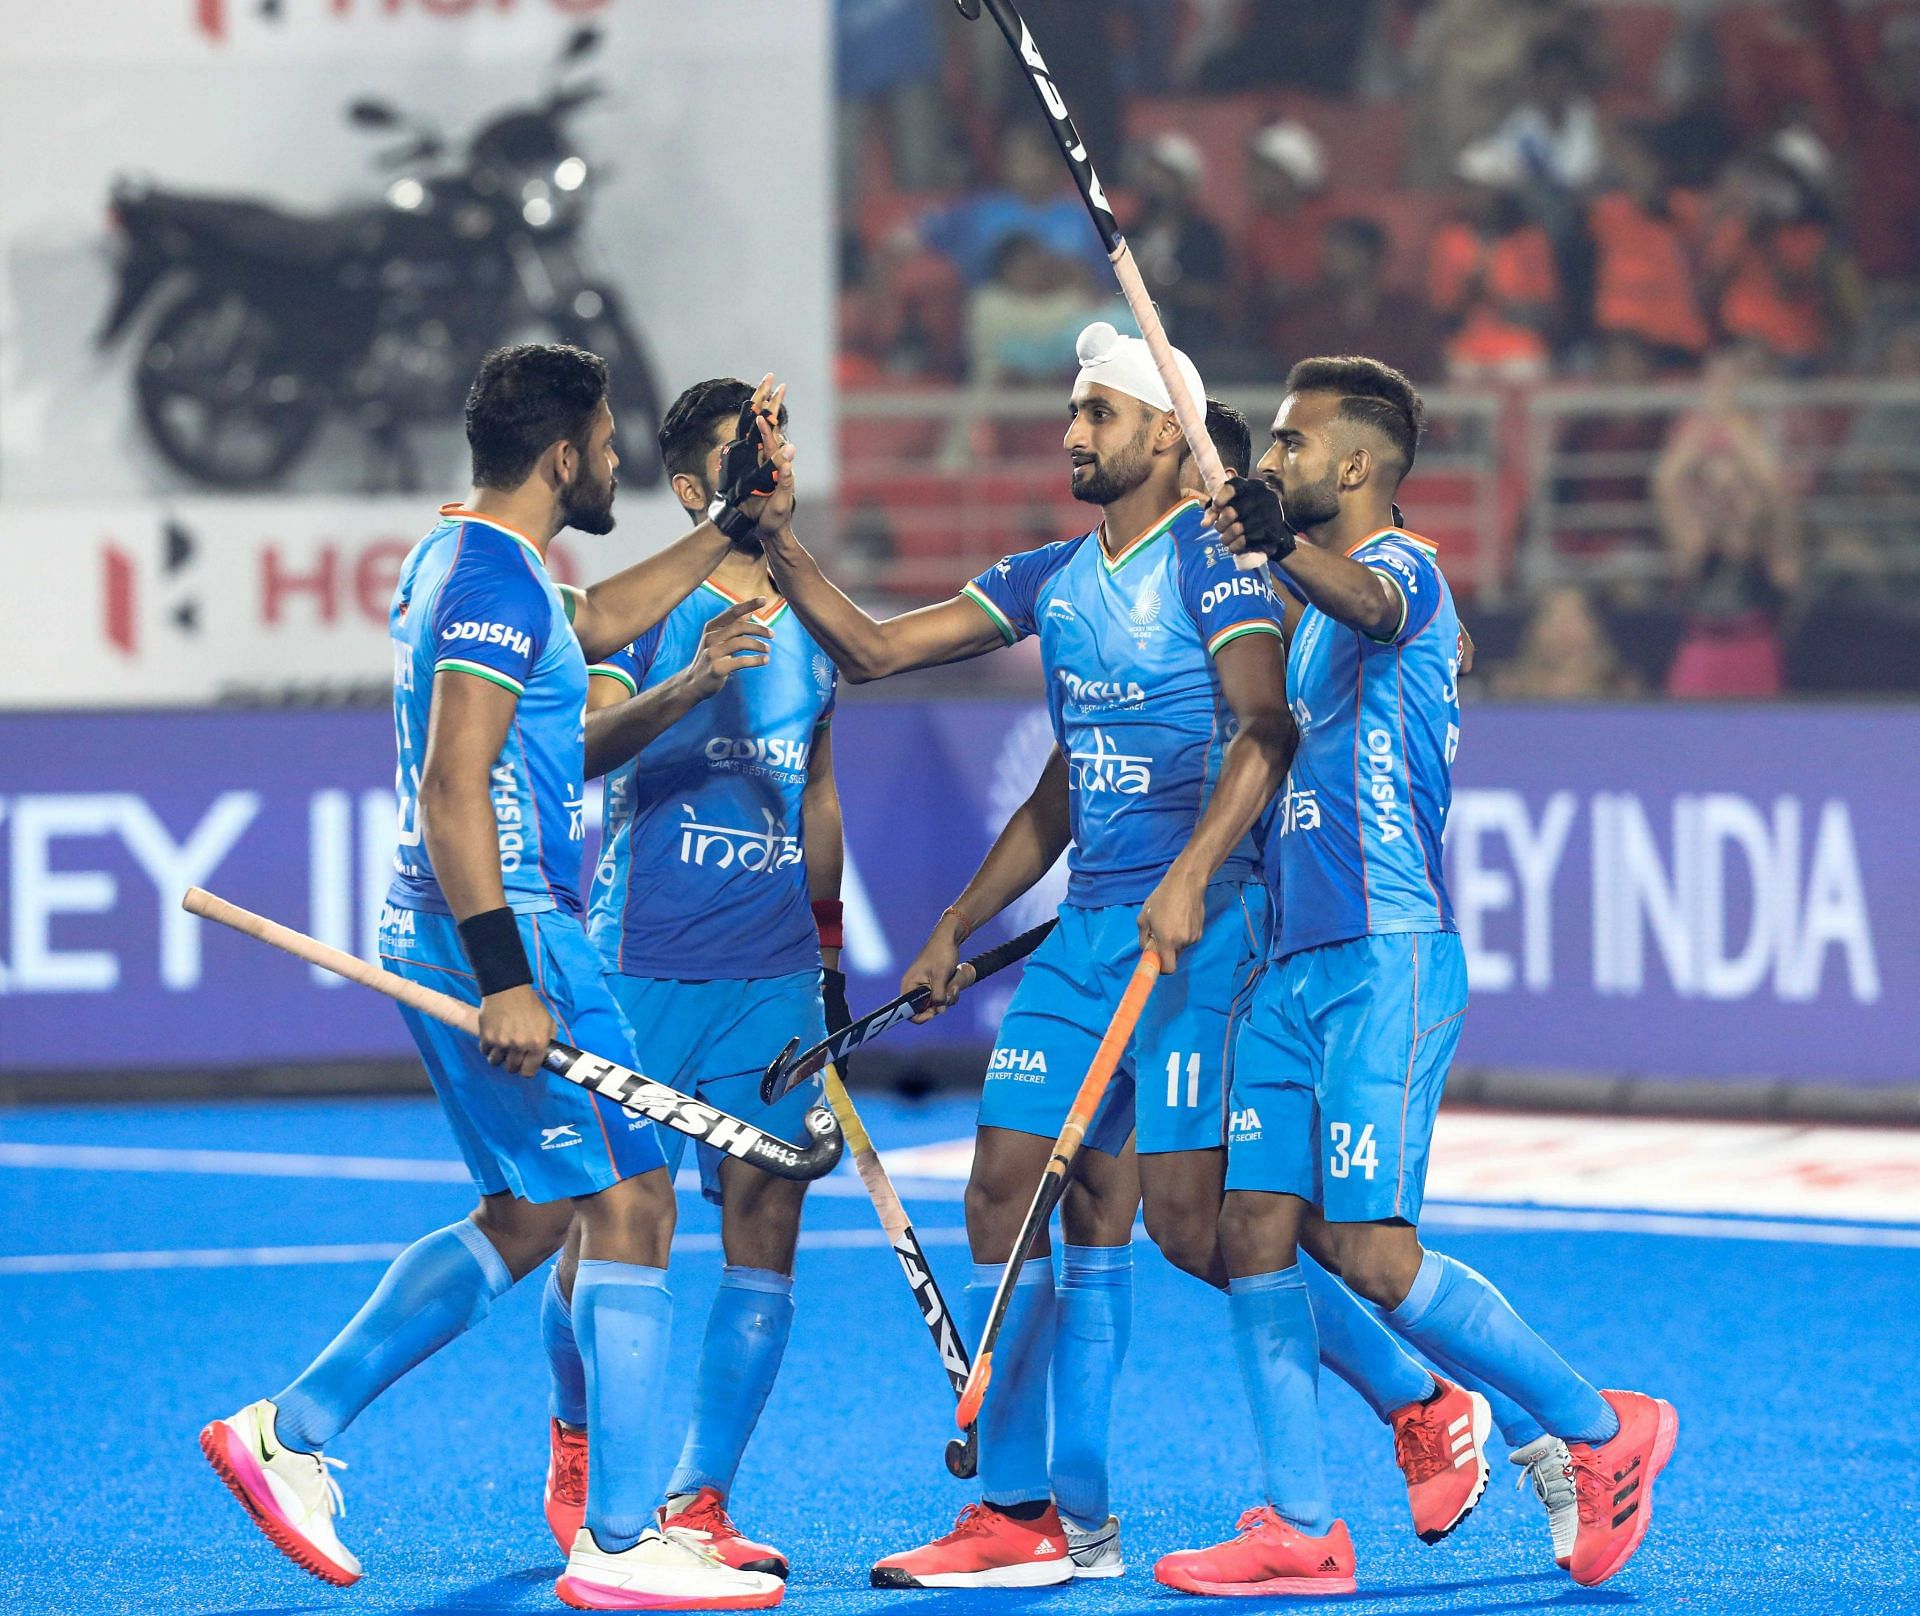 India celebrating their win against Japan in an earlier match (Image Courtesy: Twitter/Hockey India)